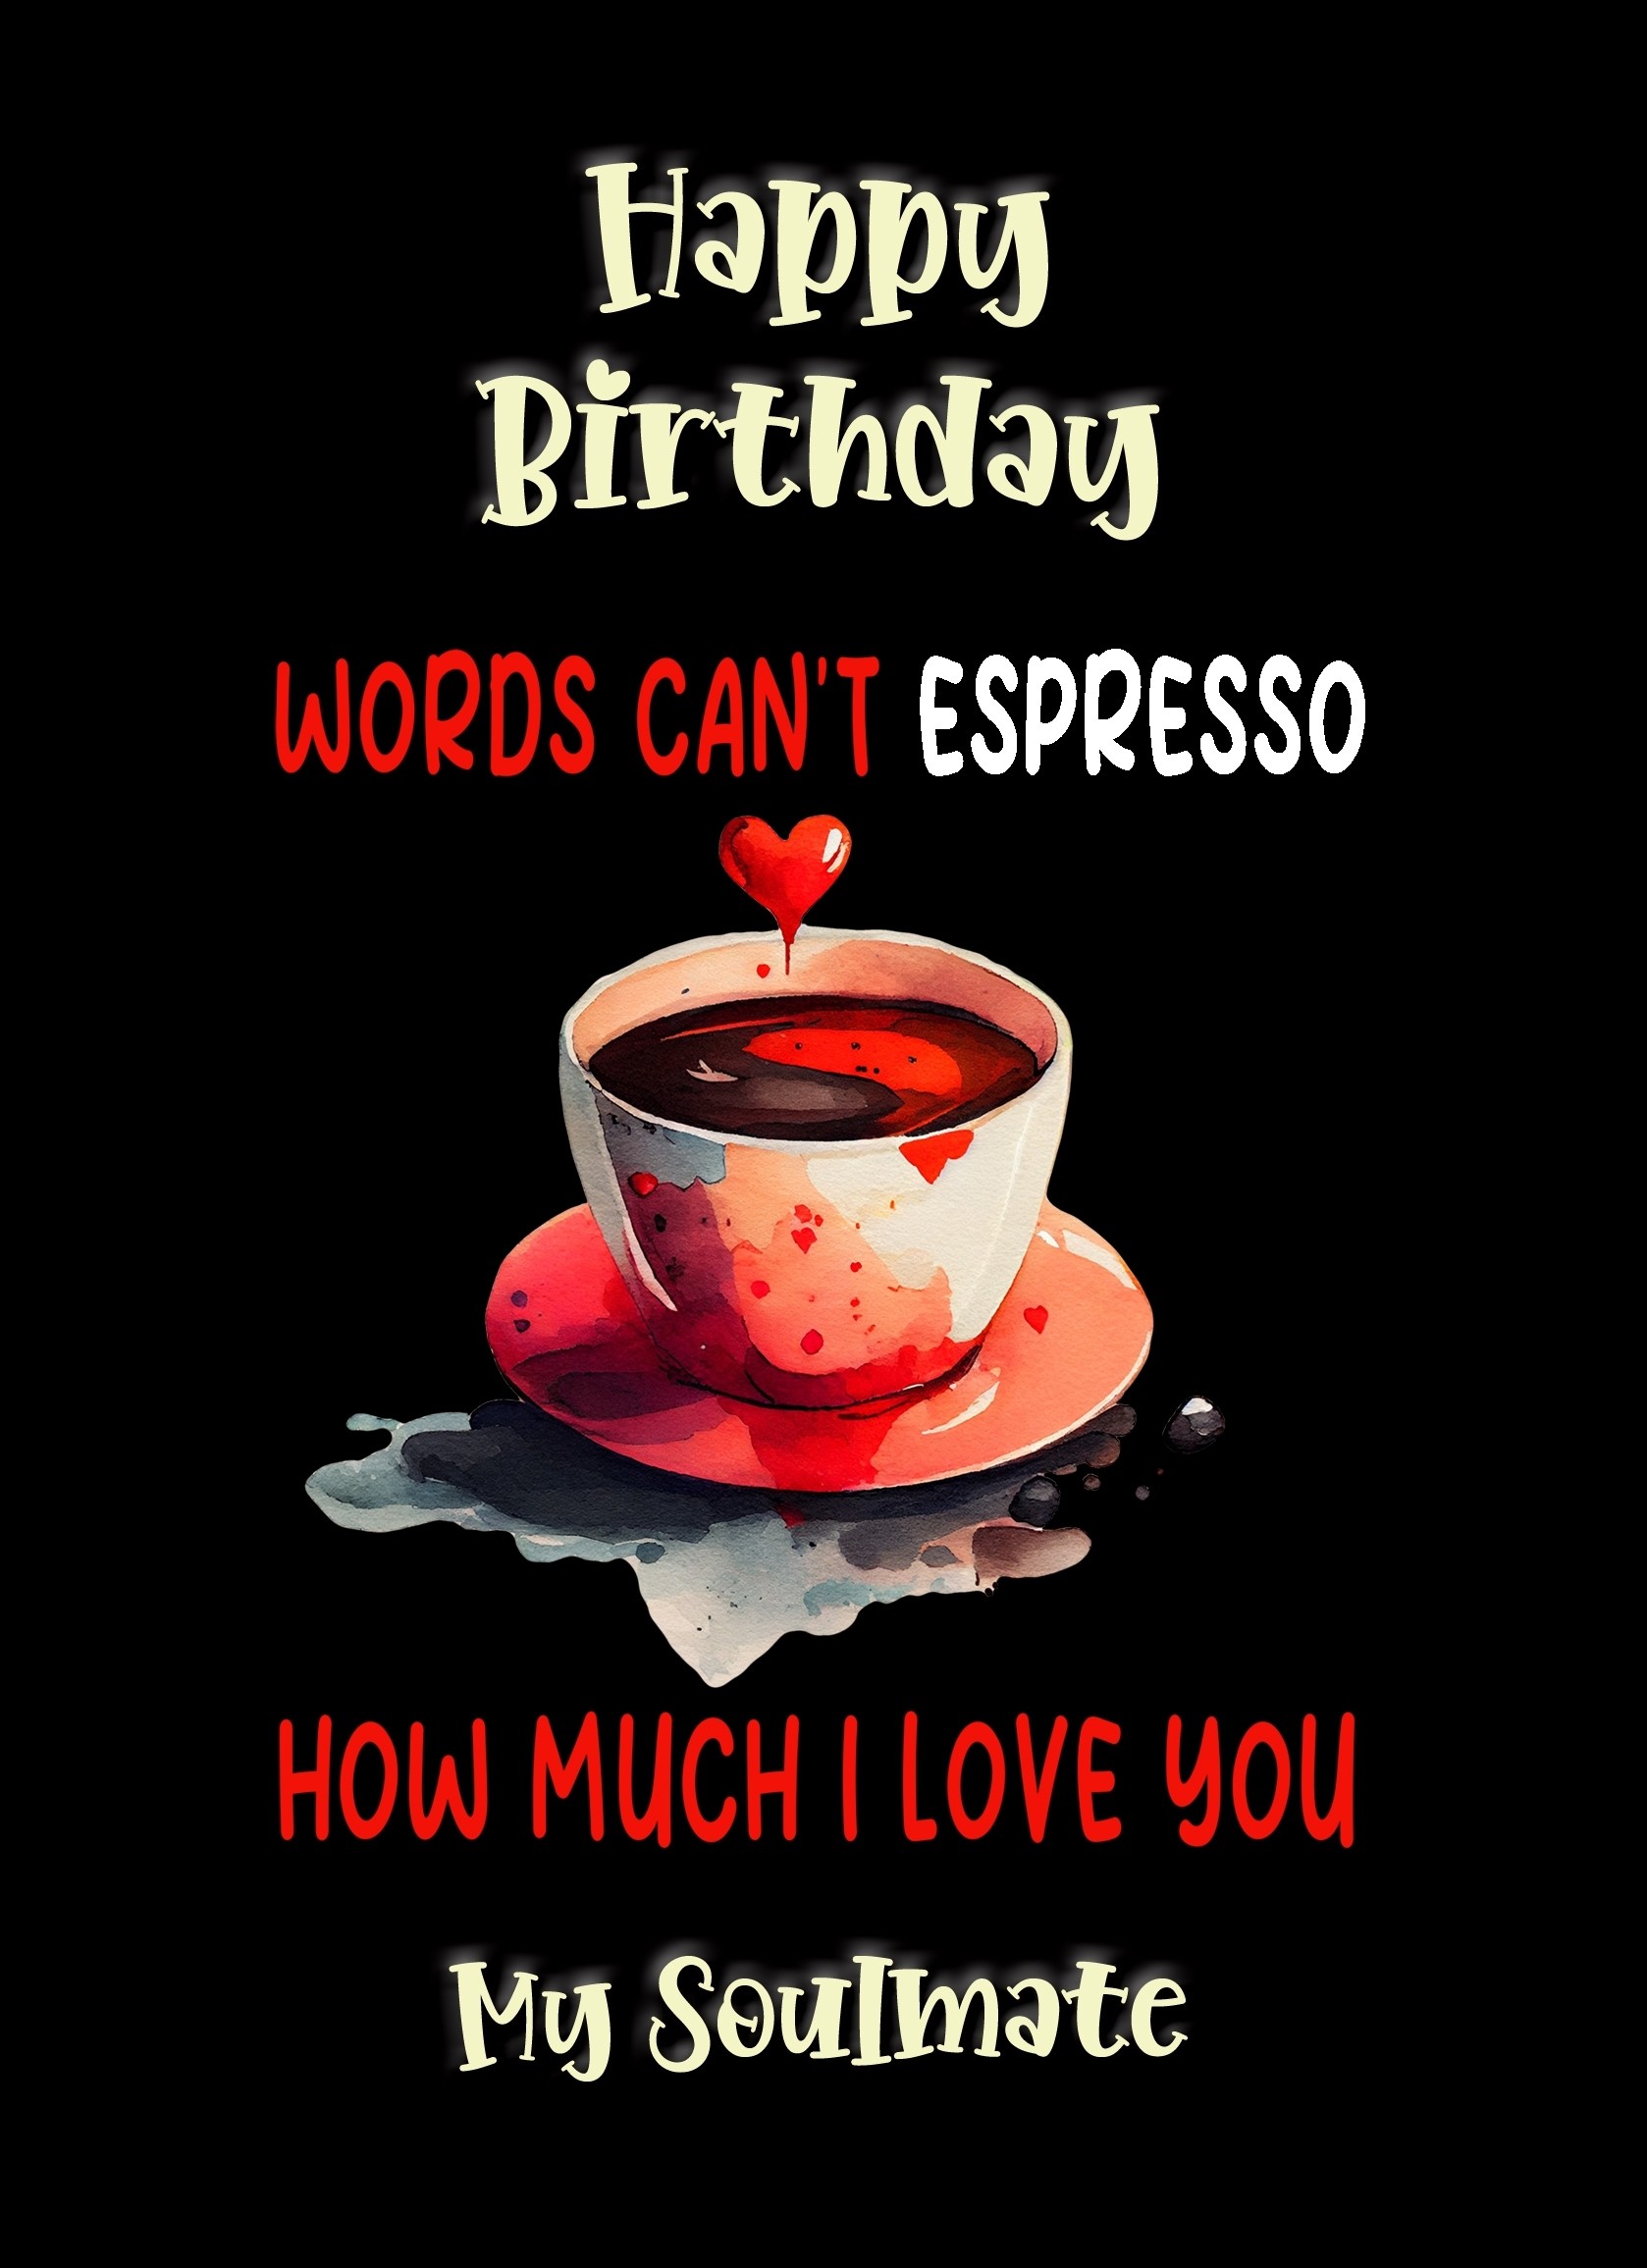 Funny Pun Romantic Birthday Card for Soulmate (Can't Espresso)